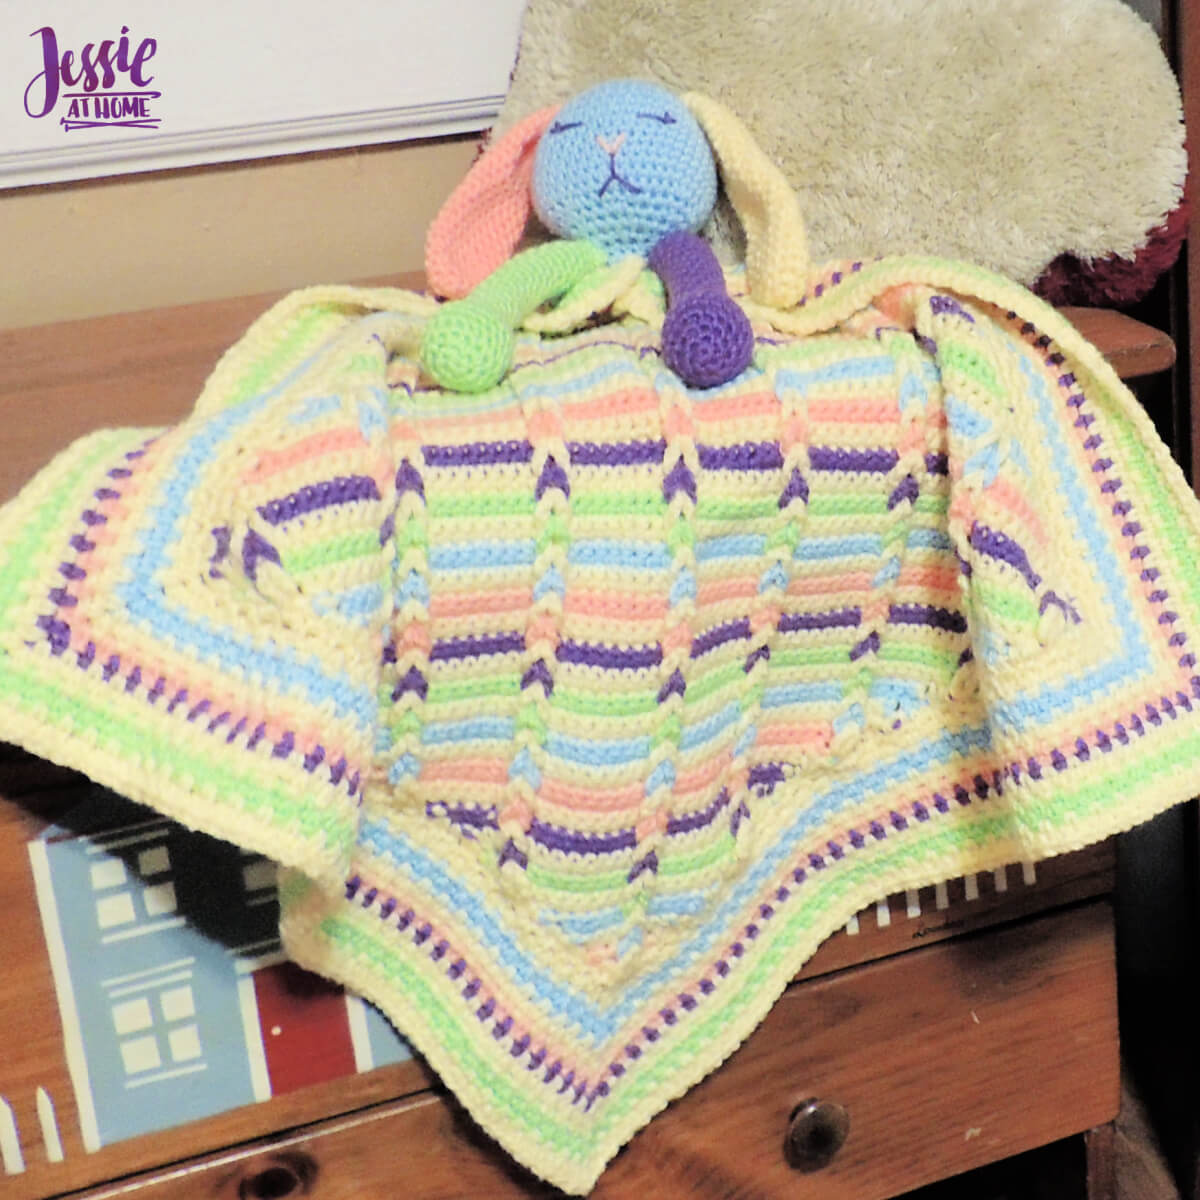 Today's Free #Crochet Pattern: Leo the Lovey by @Jessie_AtHome! crochetpatternsgalore.com/leo-the-lovey-… #crochetpattern #freepattern #crocheting